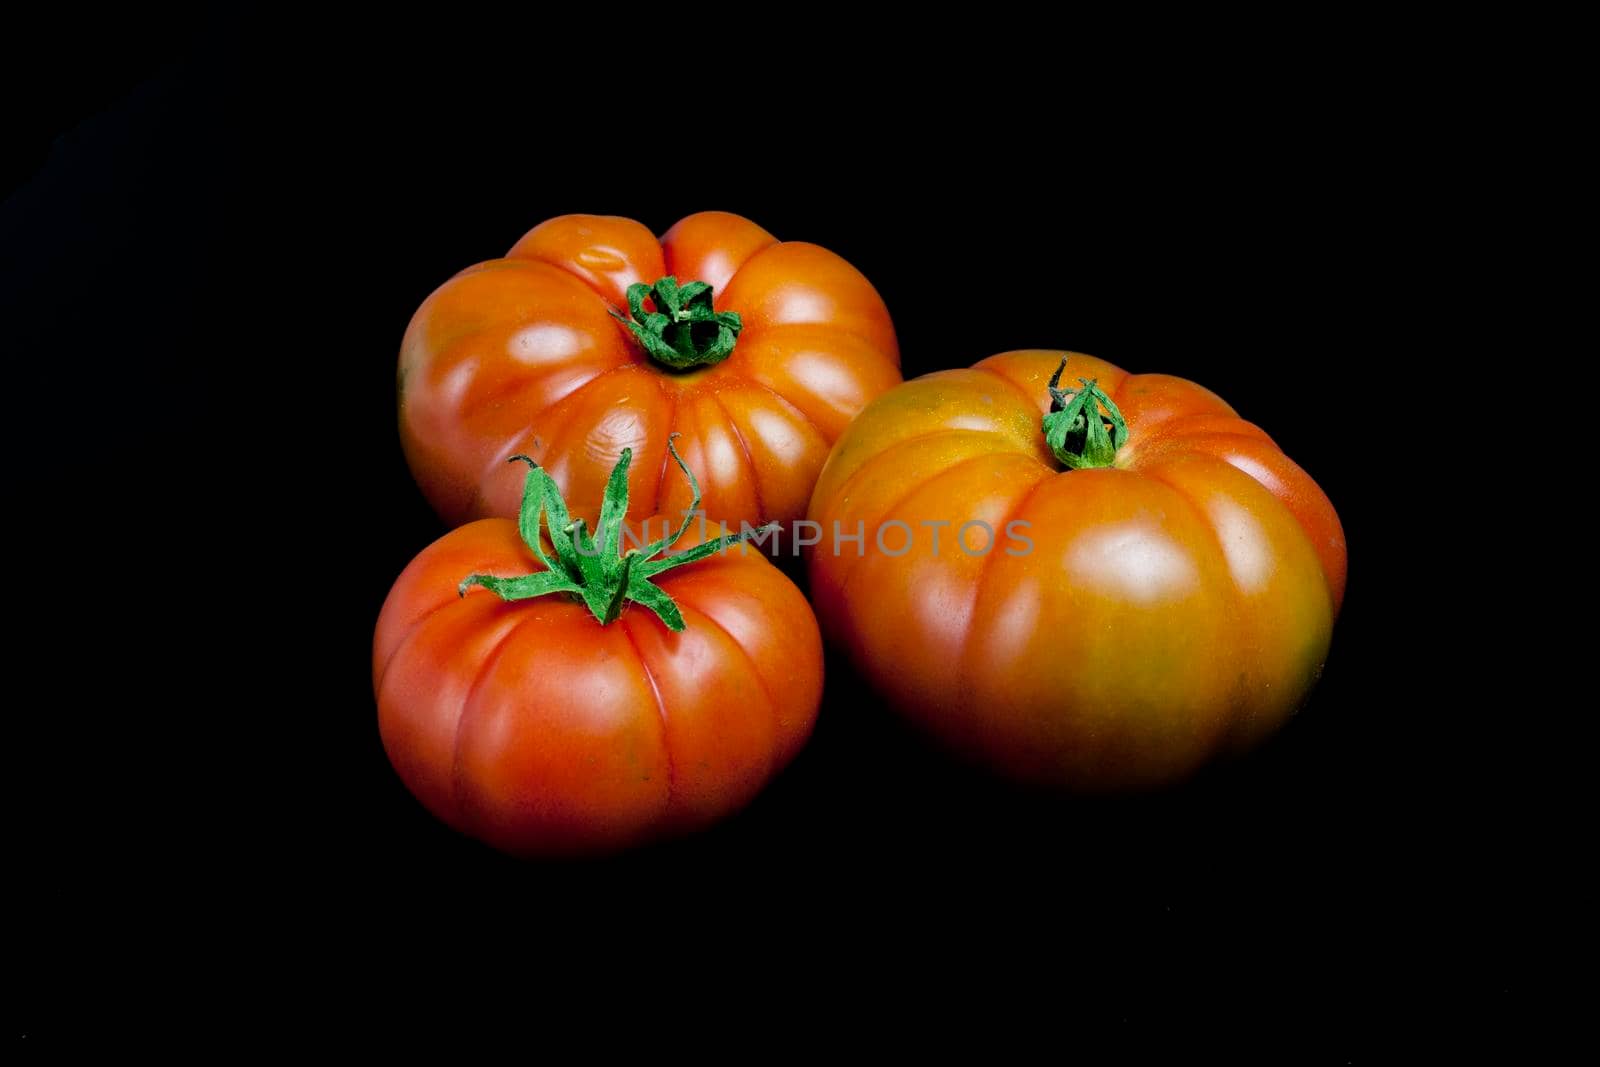 Three ripe tomatoes on a black background by Jacopo